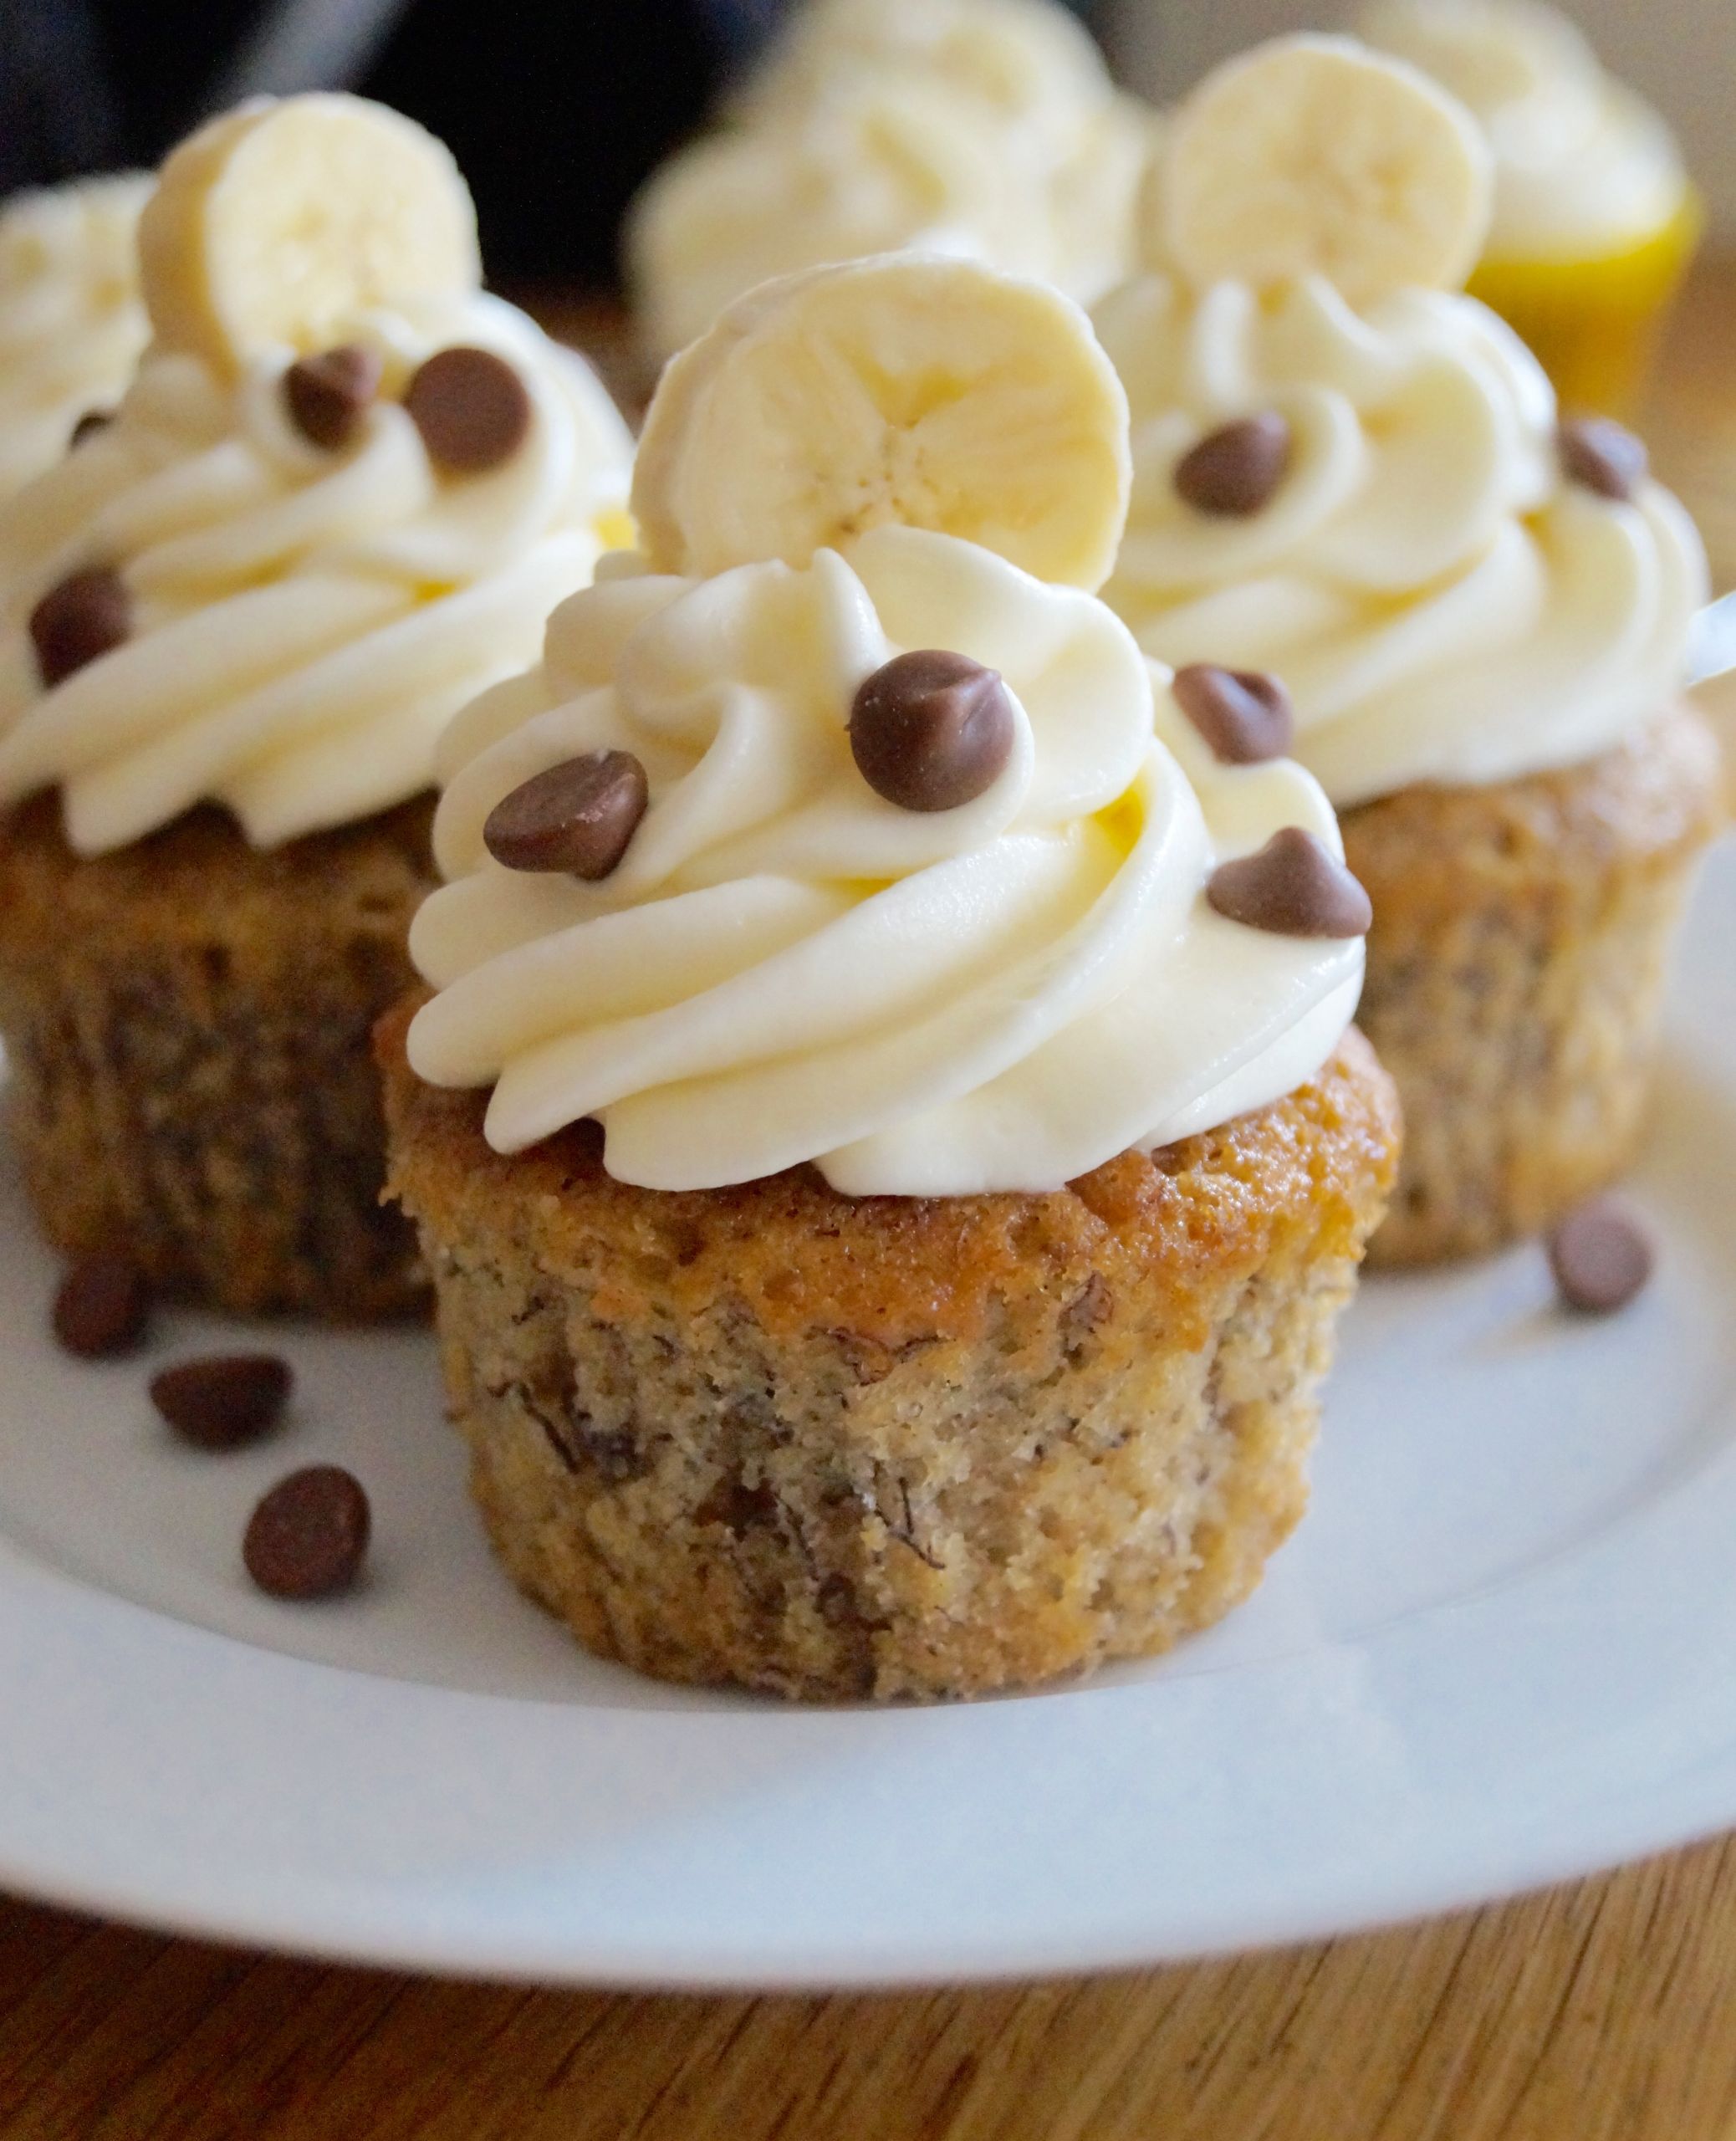 15 Of the Best Real Simple Banana Cupcakes with Cream Cheese Frosting
 Ever